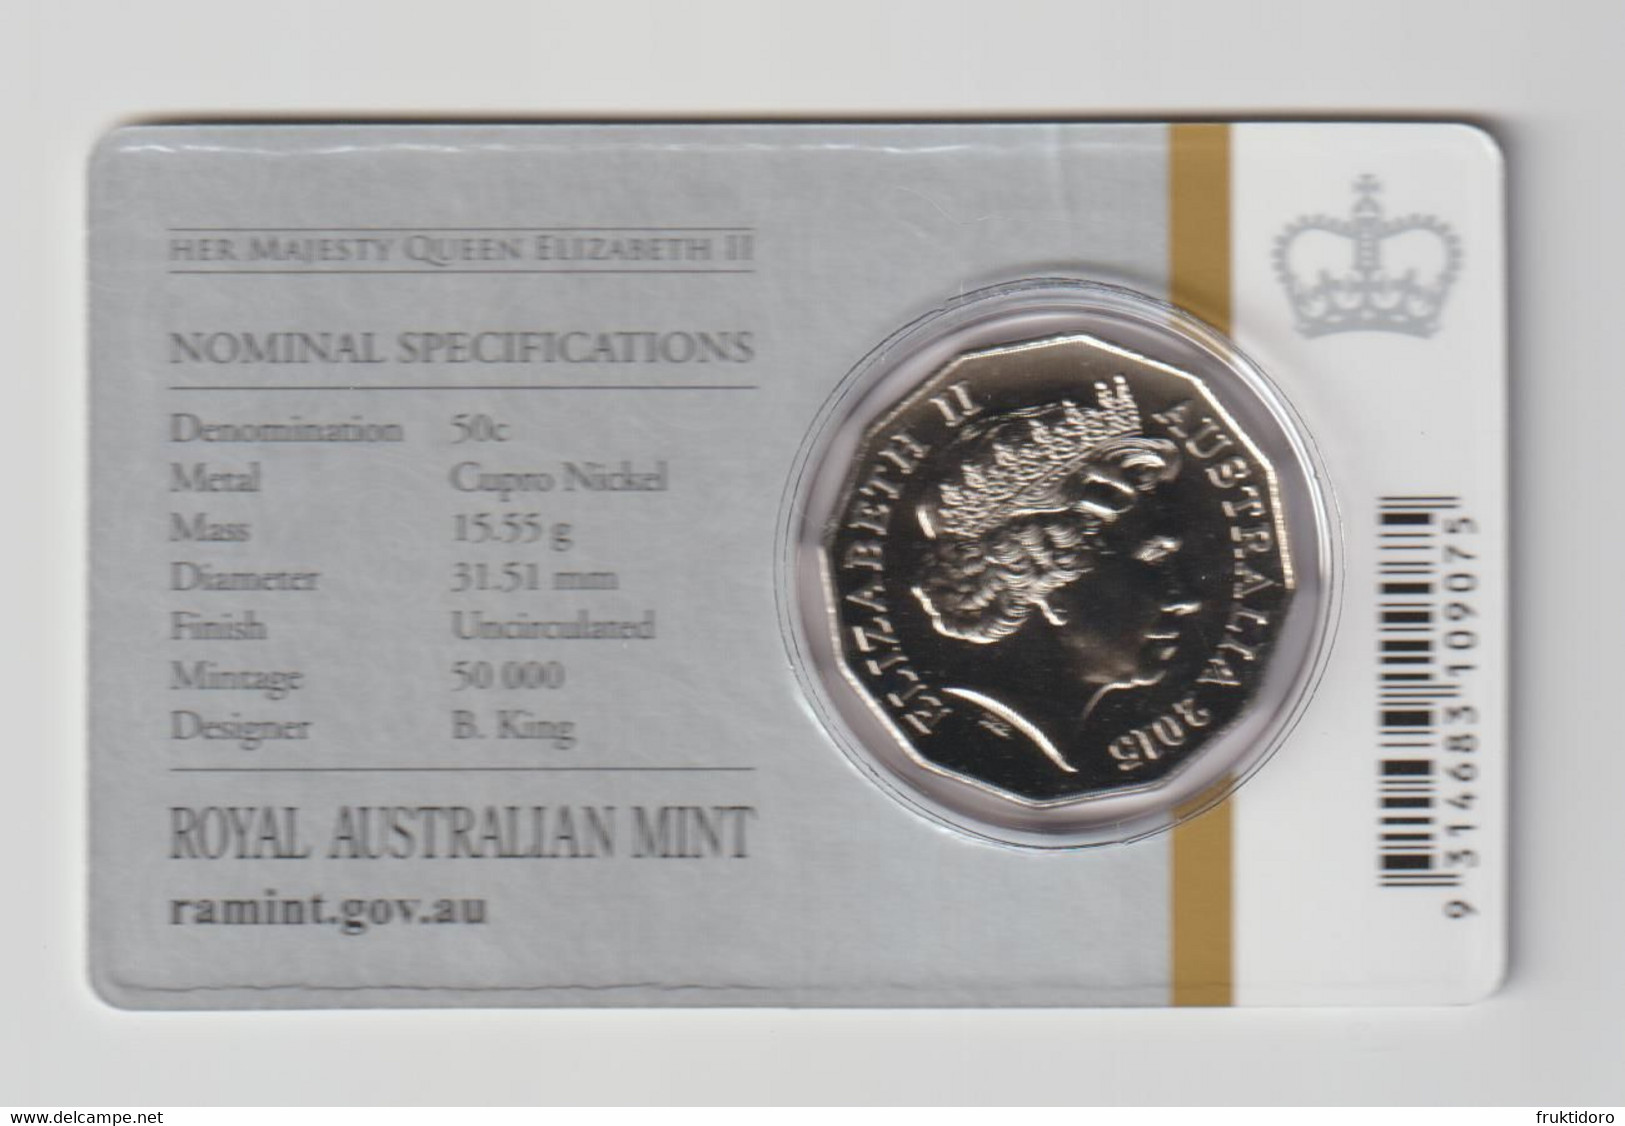 Australia 2015 Queen Elizabeth II - The Longest Reigning Monarch - Uncirculated - Coin Card - 50 Cents